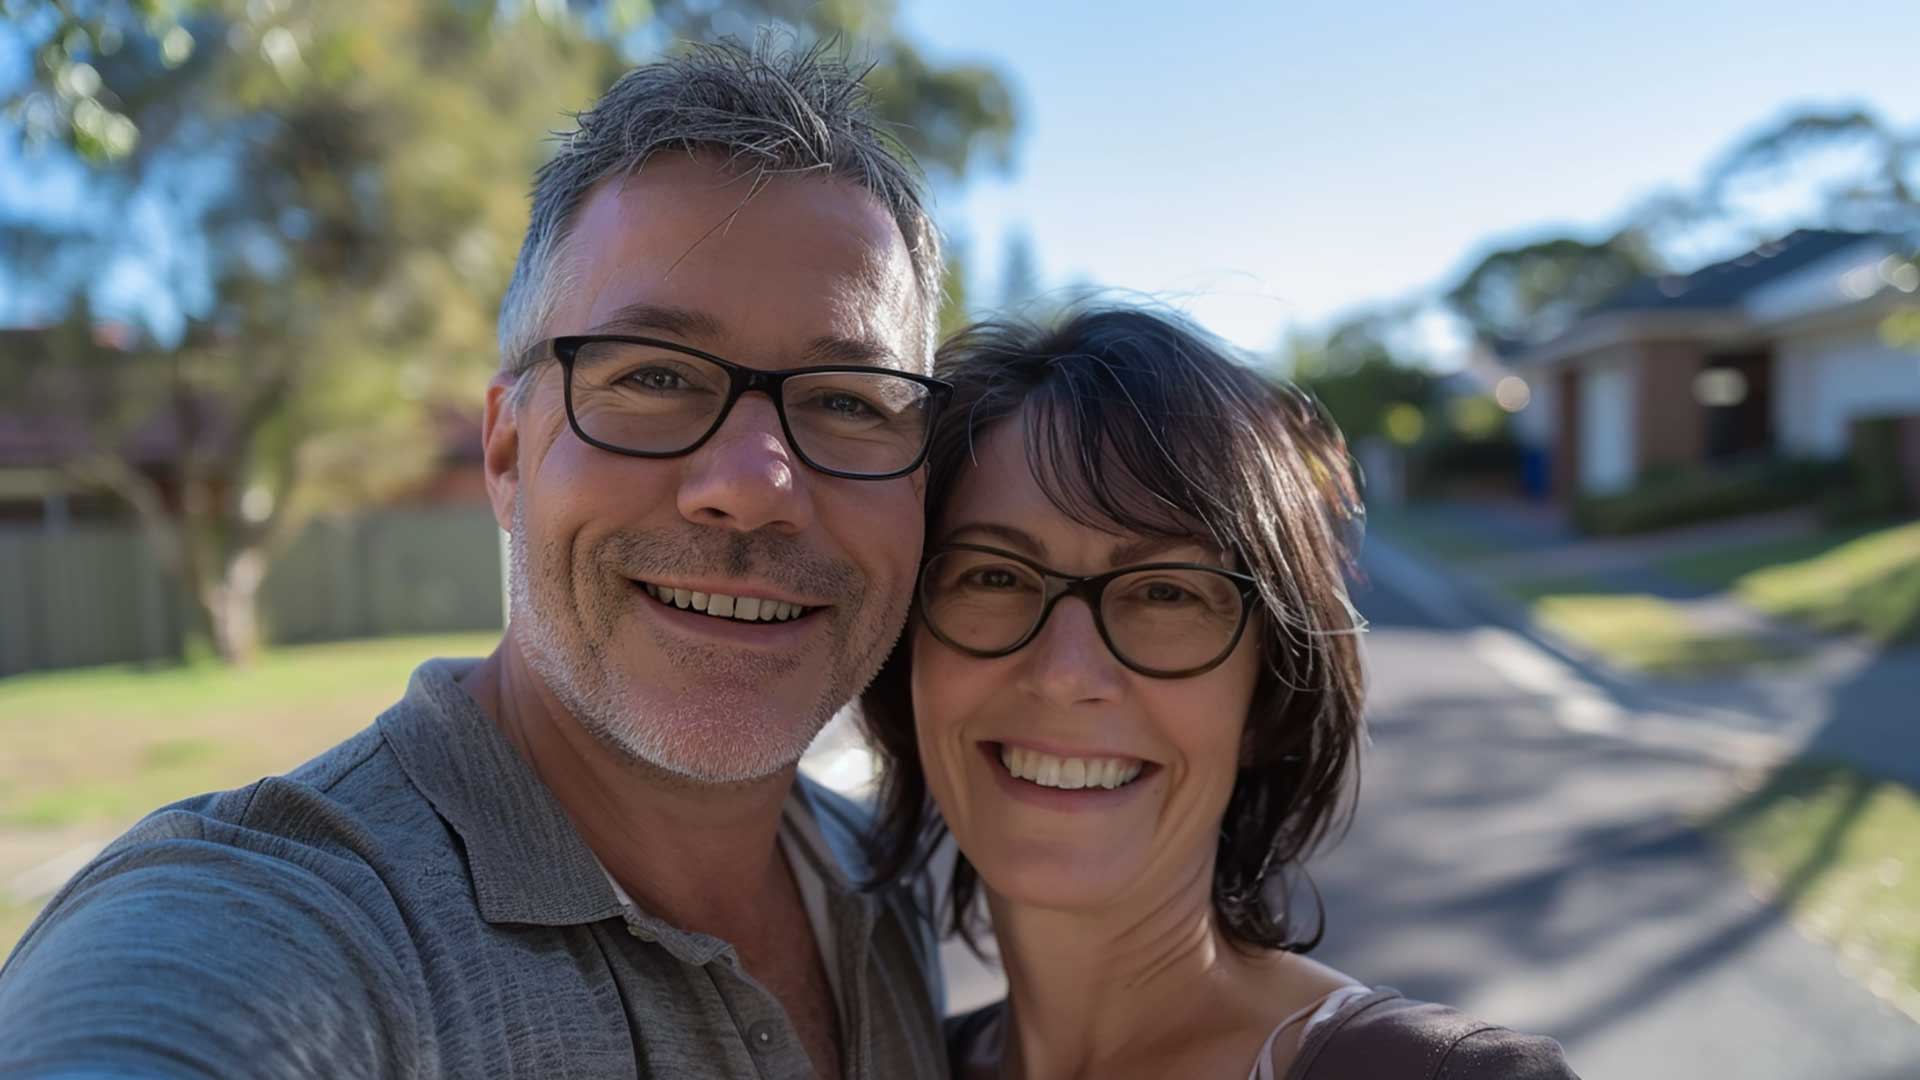 A Smiling Couple Wearing Glasses Takes A Selfie Outdoors On A Sunny Day In A Suburban Neighborhood.